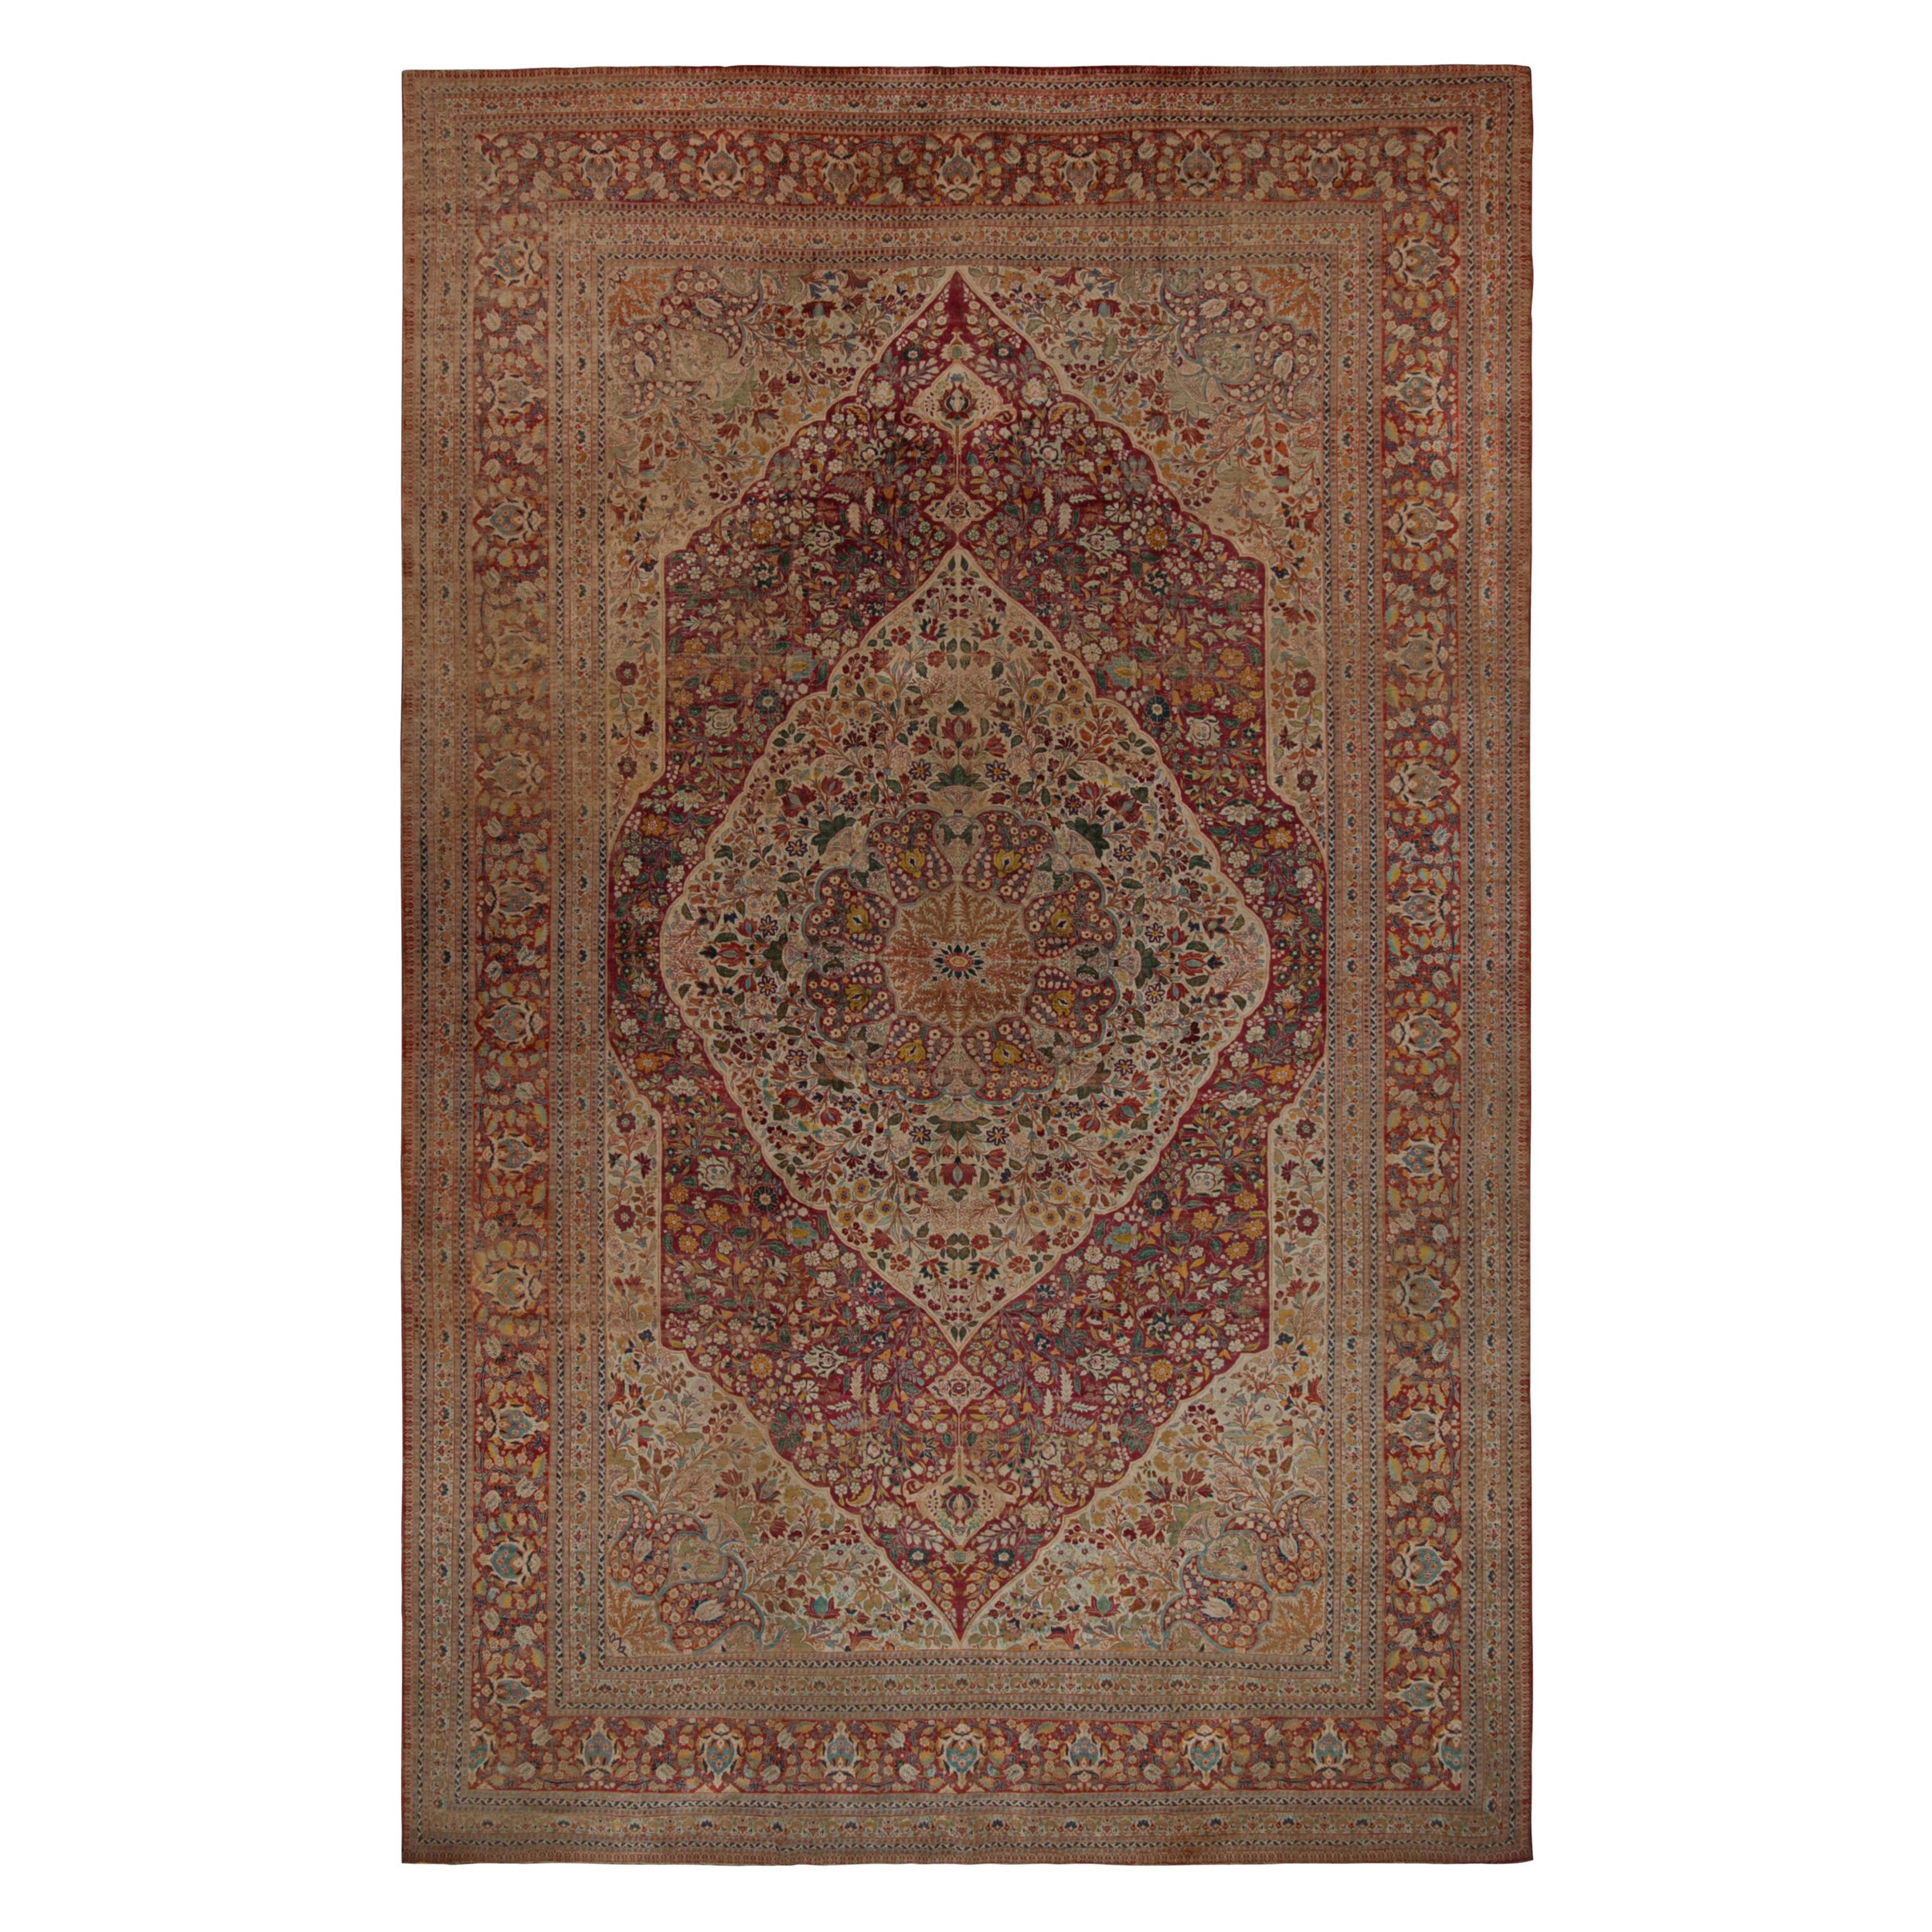 Antique Persian Tabriz Rug, in Brown, with Floral Patterns, from Rug & Kilim For Sale